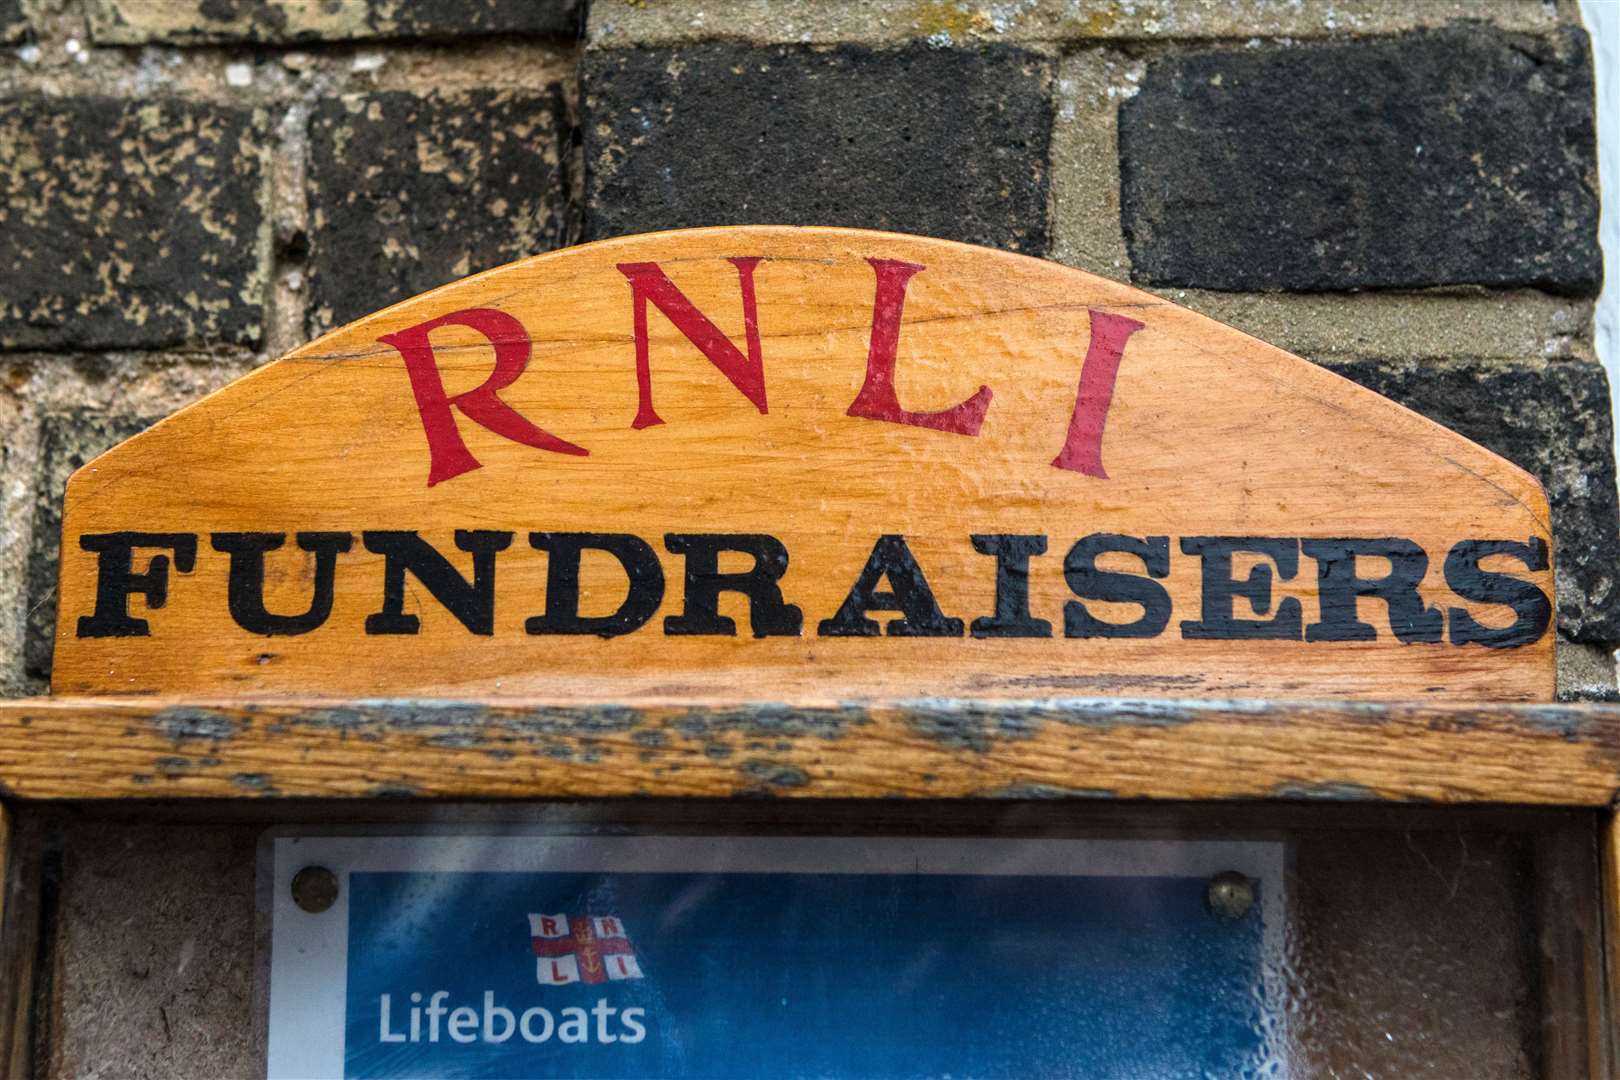 The Lochinver RNLI fundraiser is being held on Sunday, July 24.